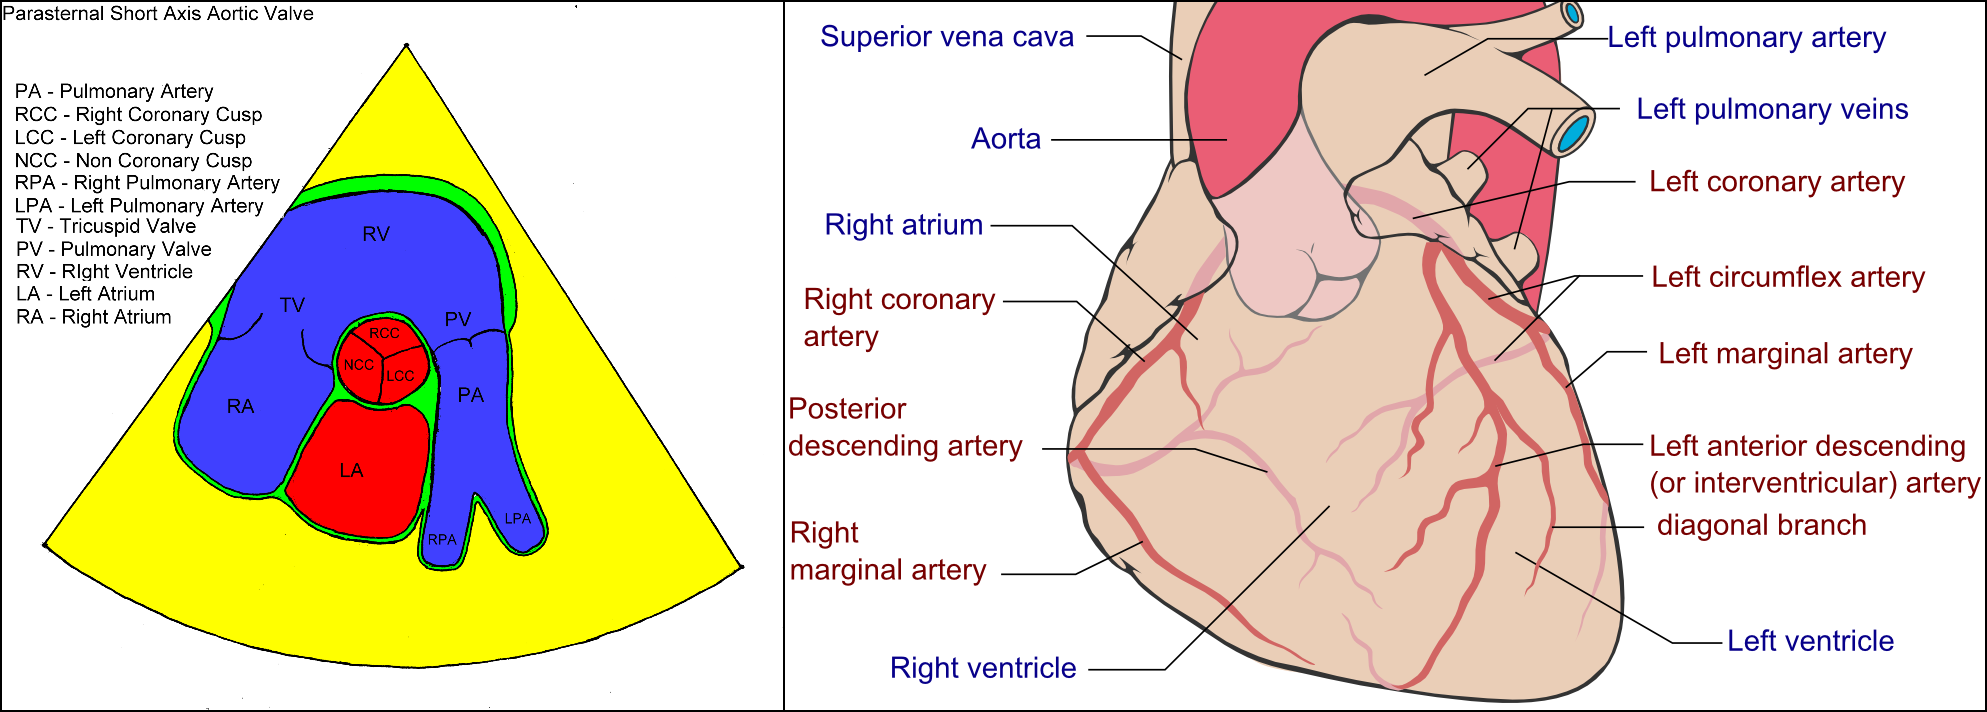 Schematic showing the origination of the coronary arteries.